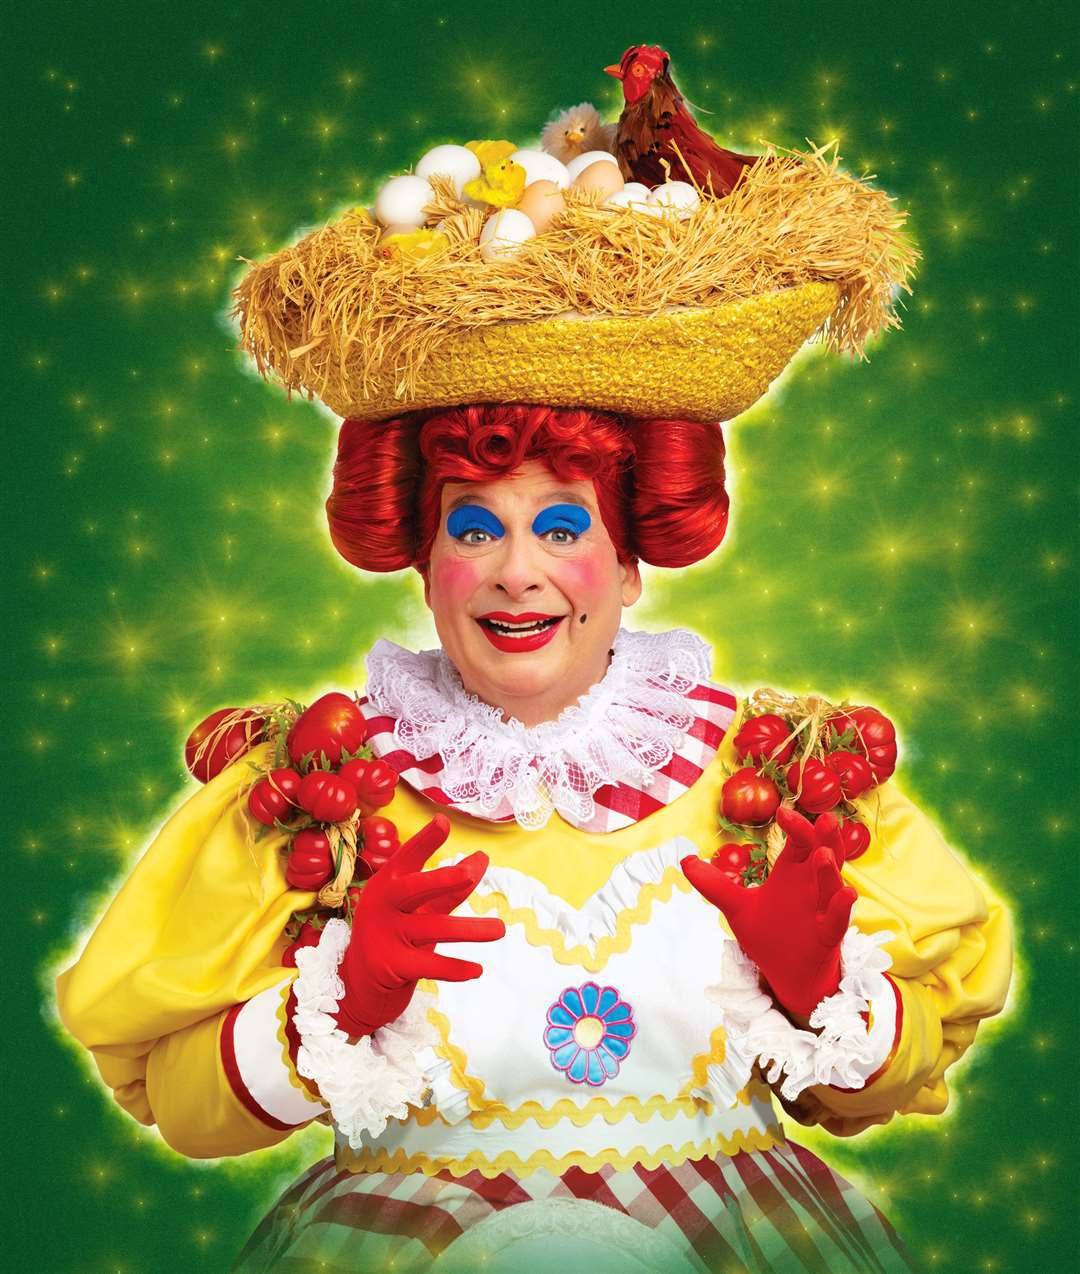 Christopher Biggins will star in this year's pantomime at the Orchard Theatre